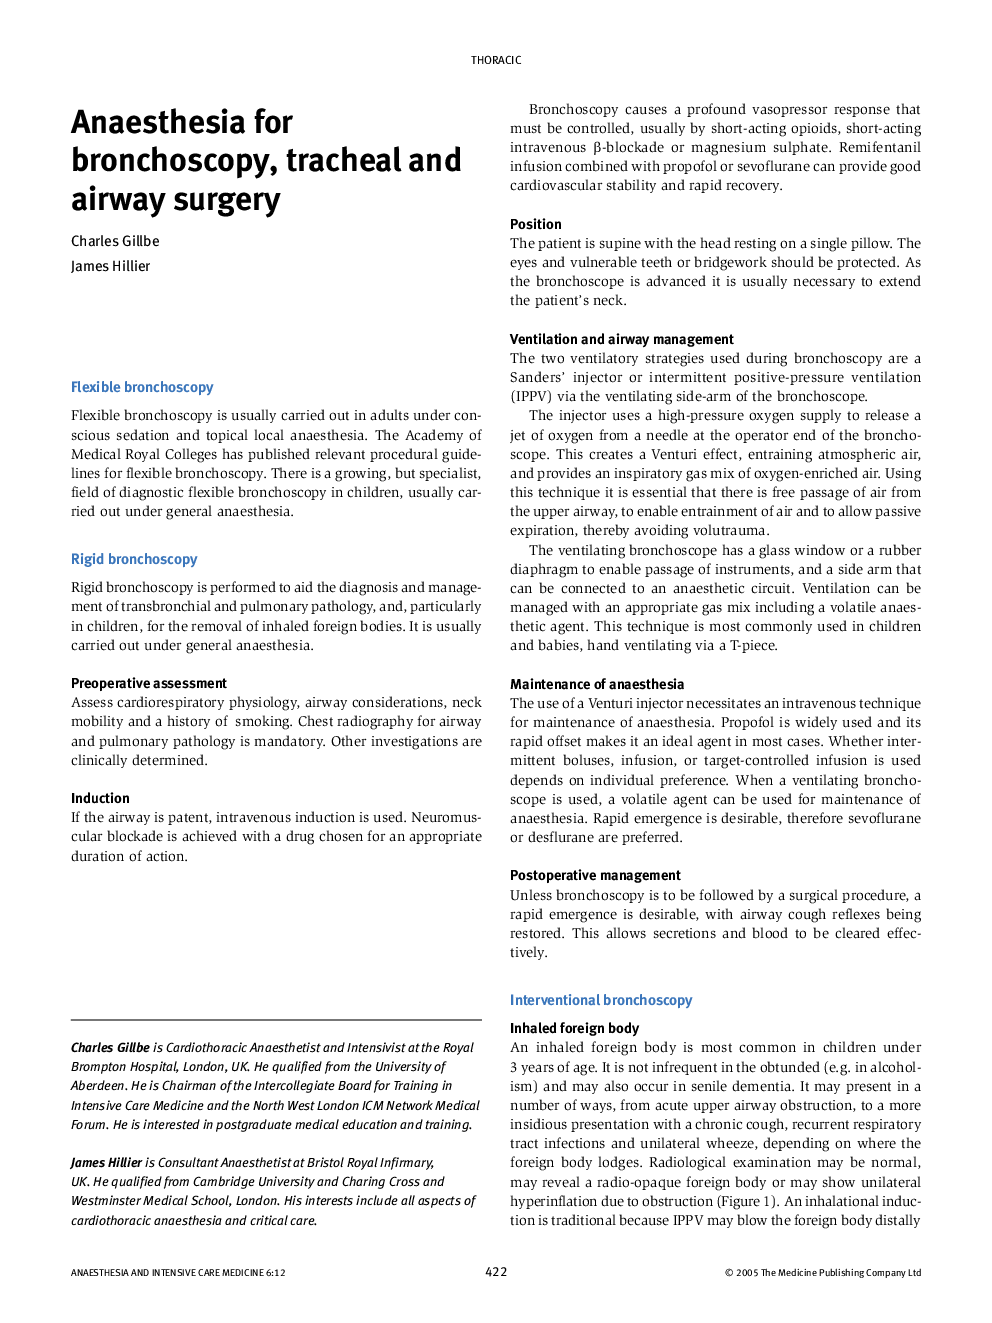 Anaesthesia for bronchoscopy, tracheal and airway surgery